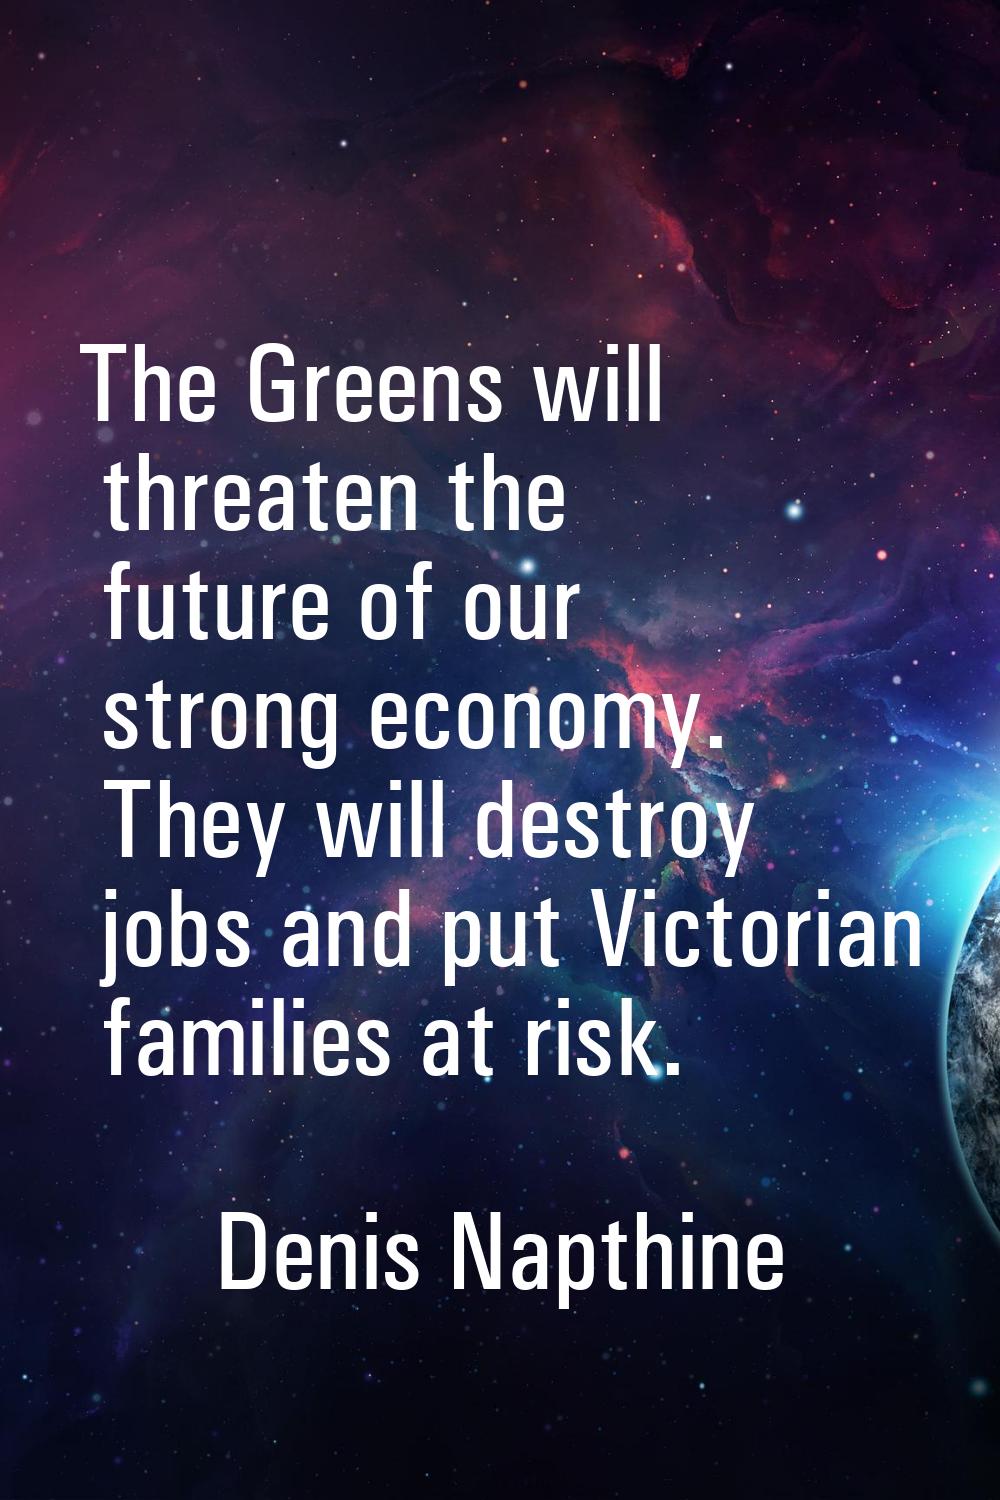 The Greens will threaten the future of our strong economy. They will destroy jobs and put Victorian